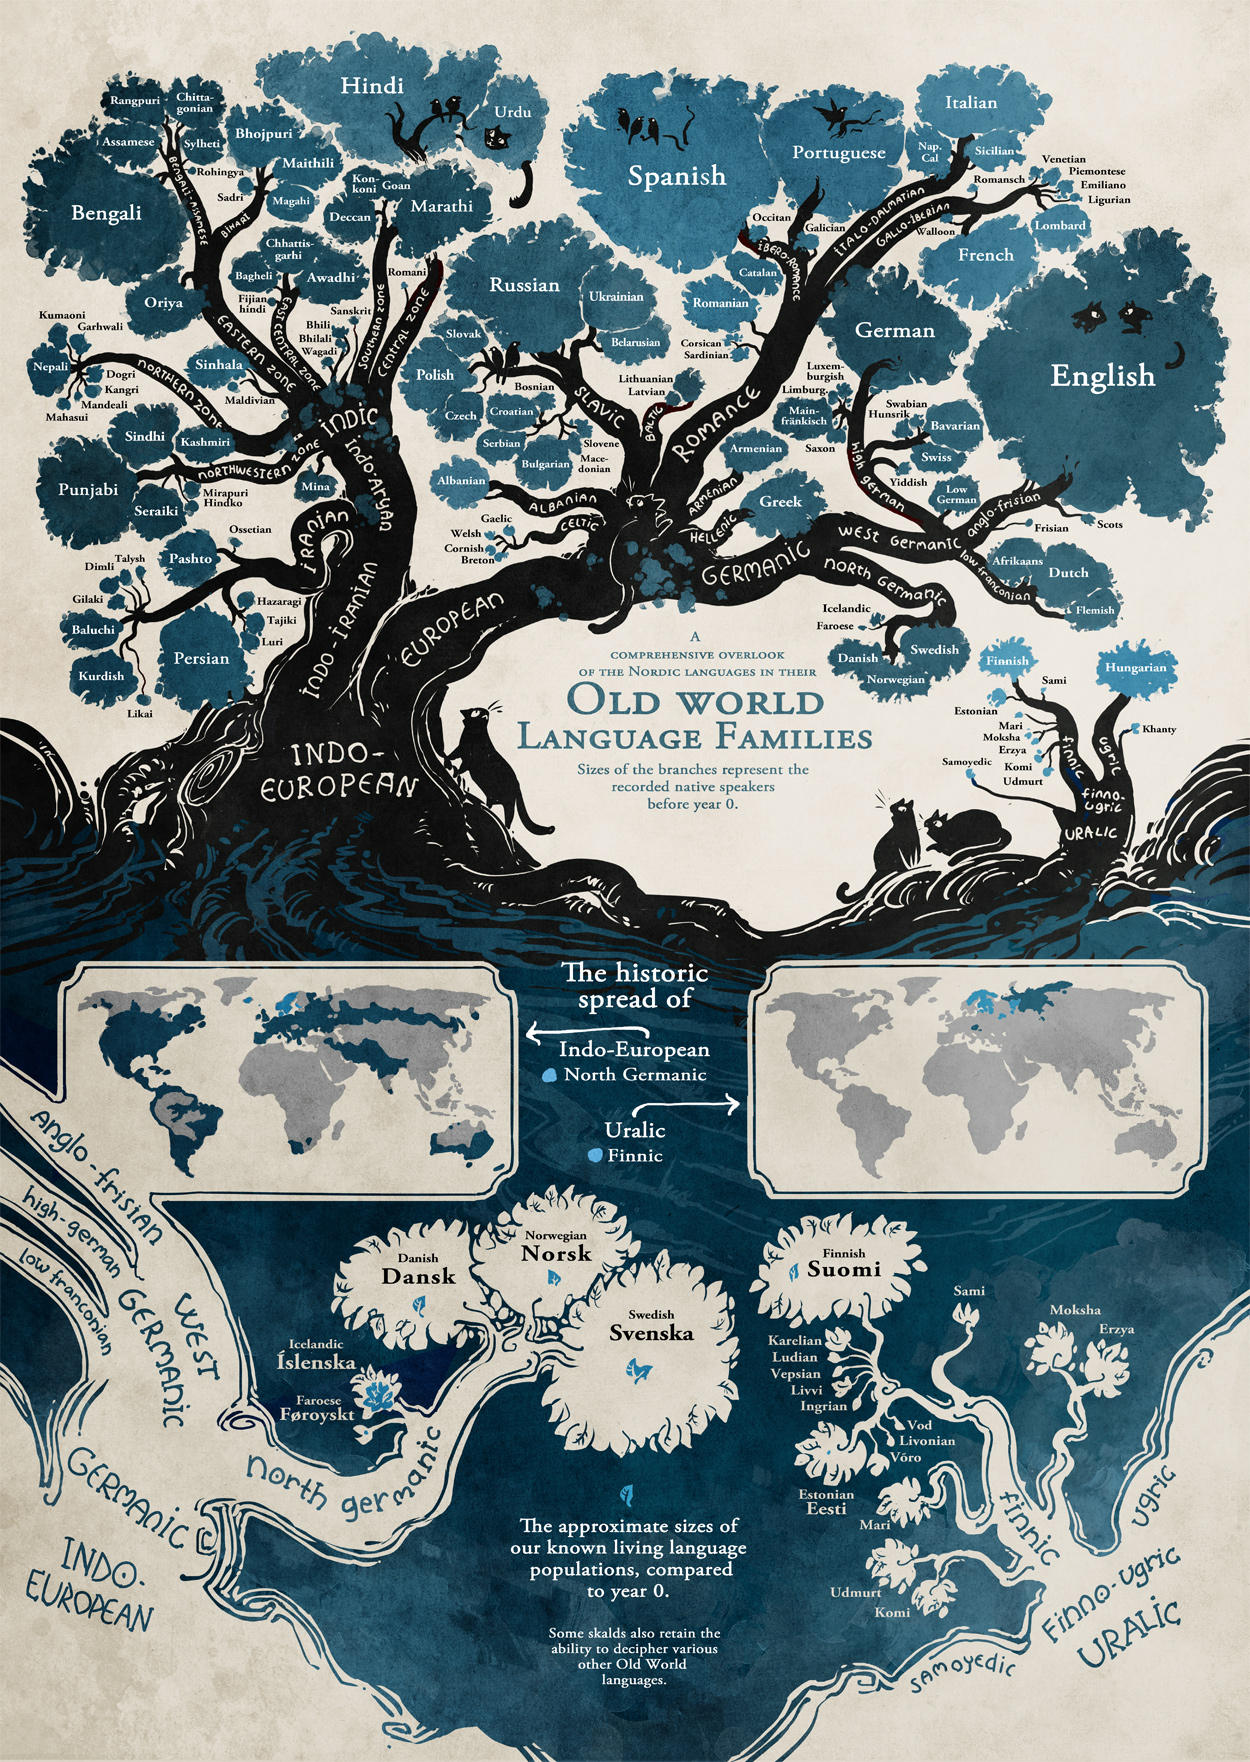 The tree of languages visual 